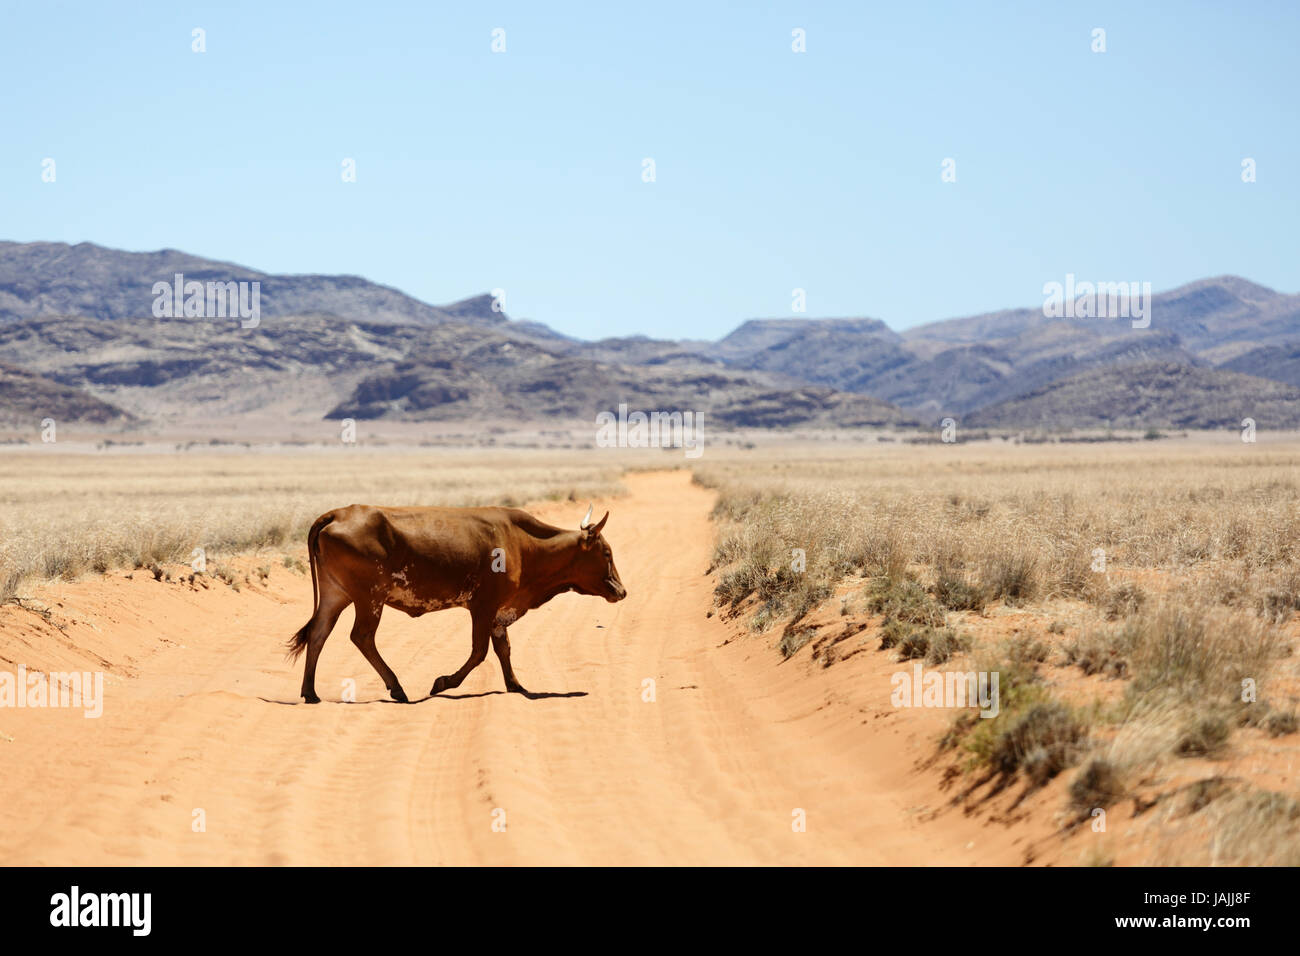 Cow crossing a dusty road, Namibia. Stock Photo